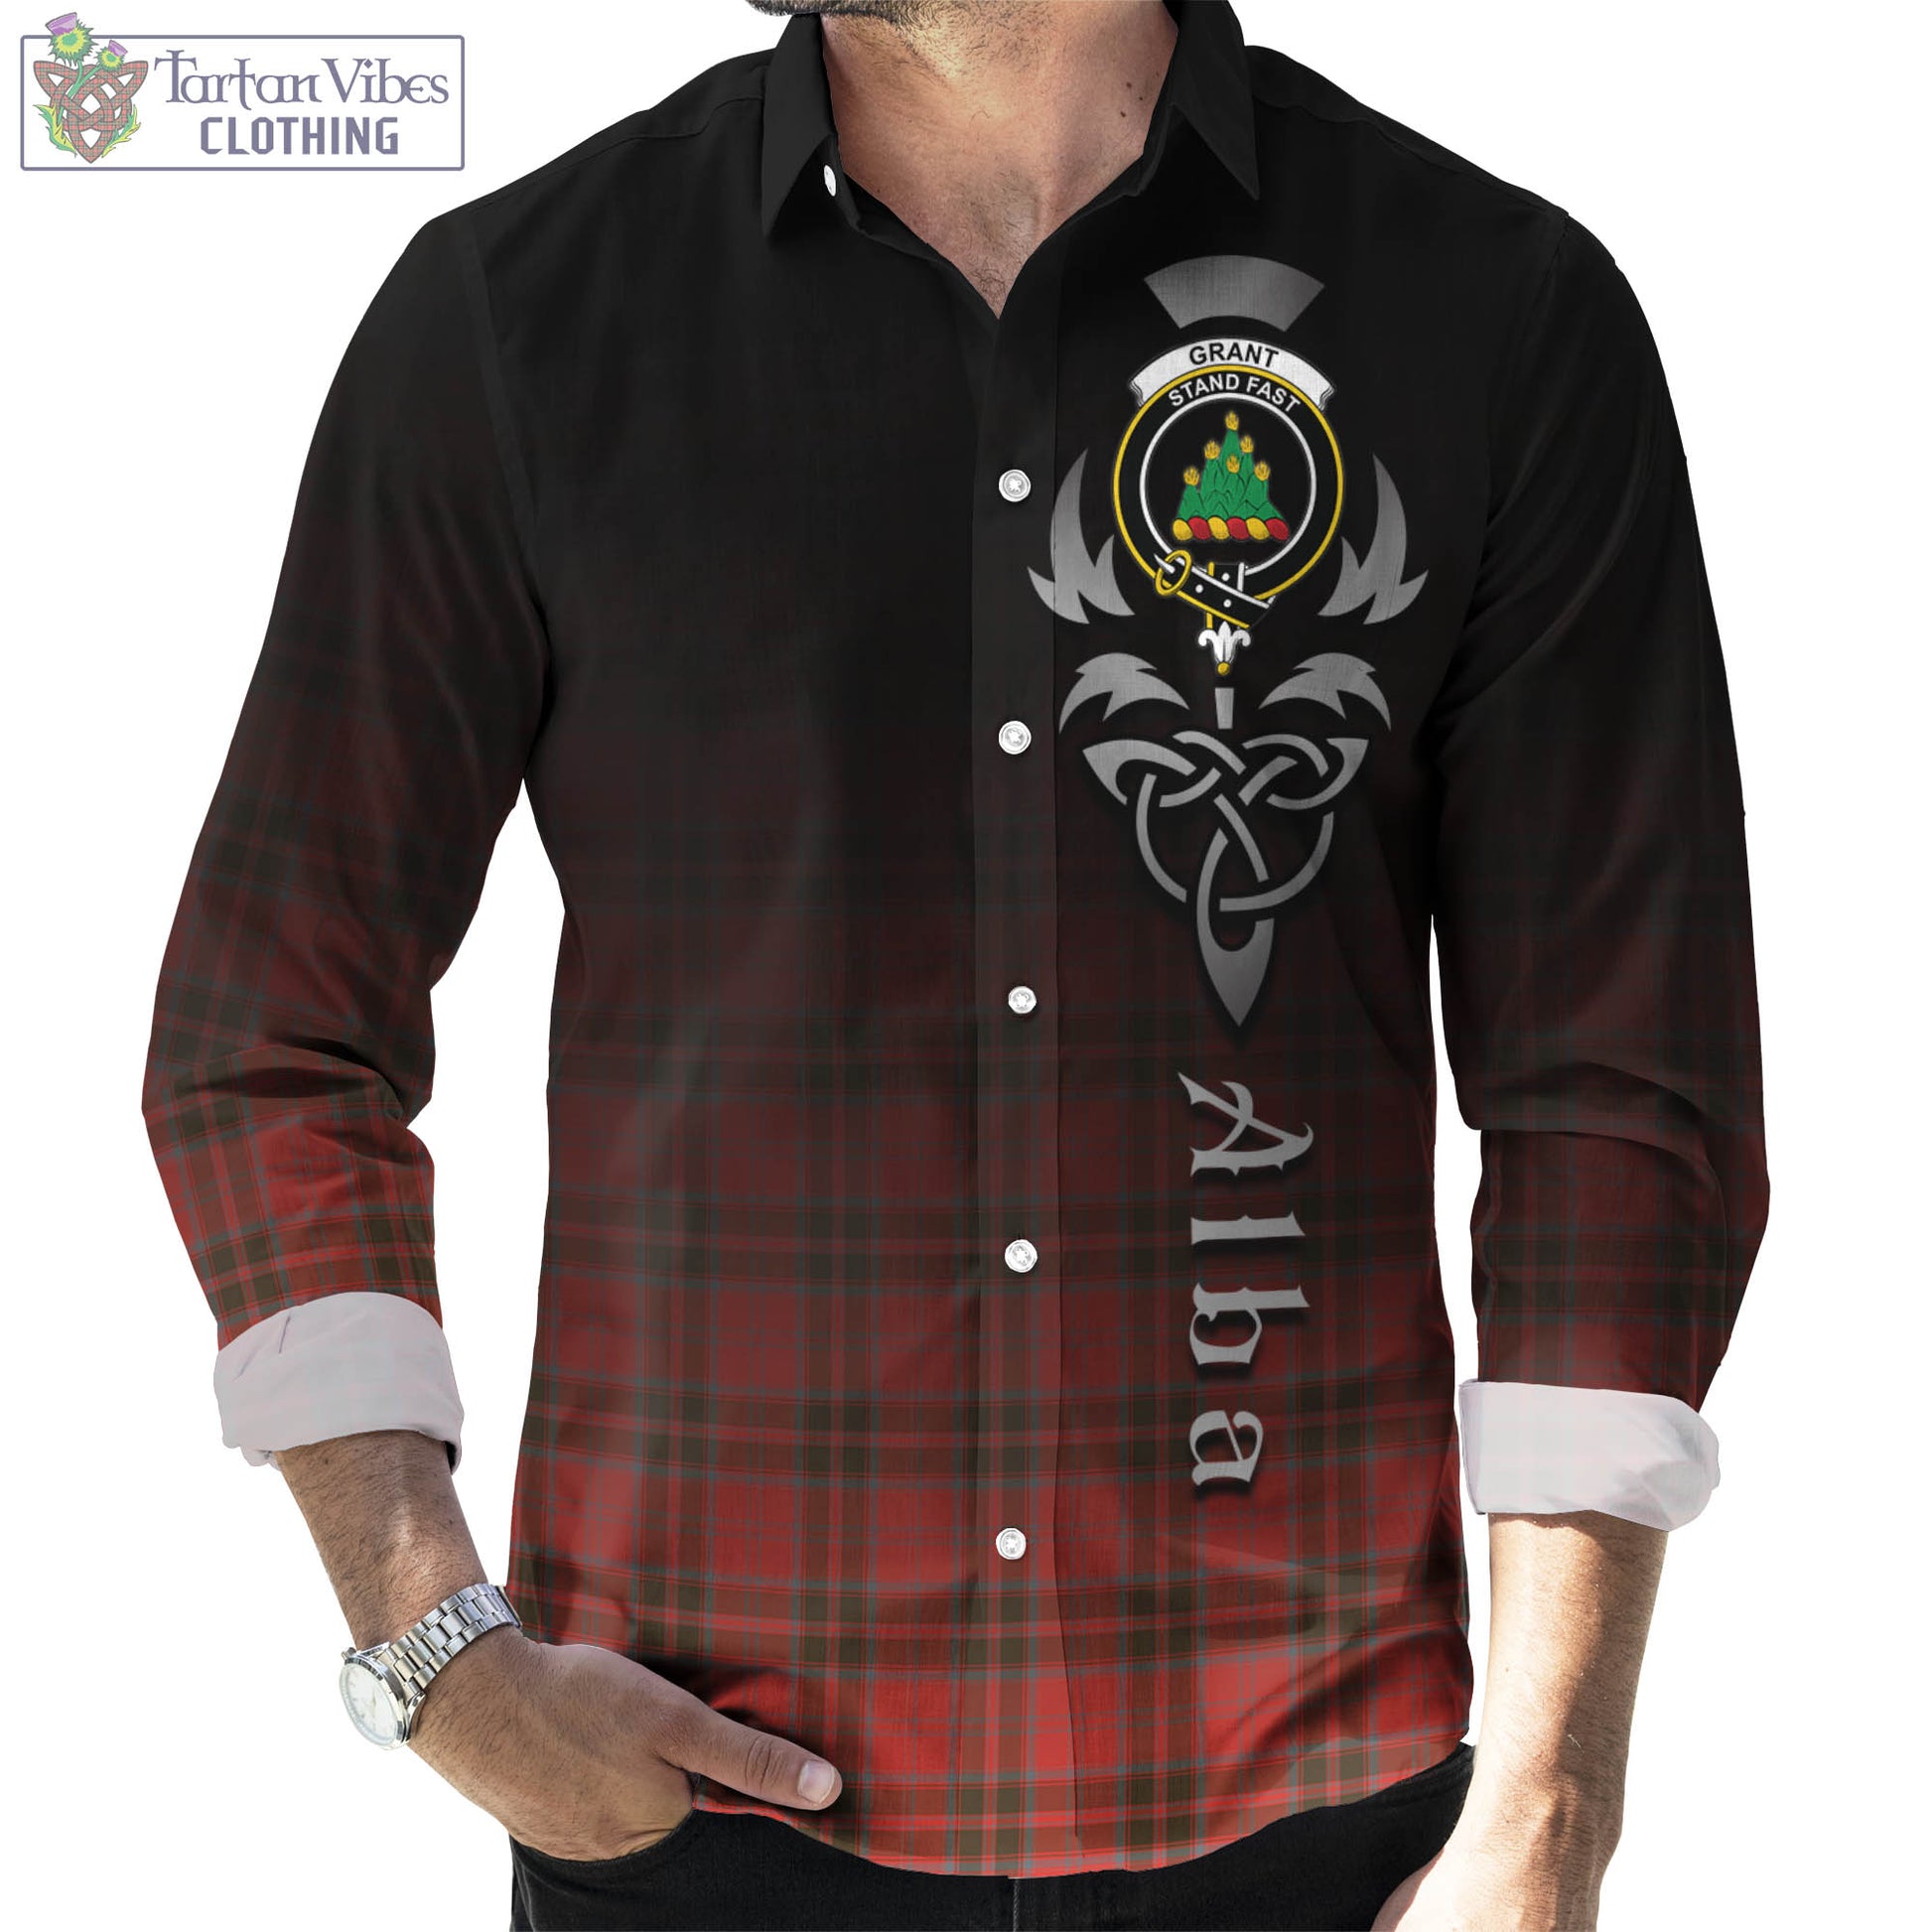 Tartan Vibes Clothing Grant Weathered Tartan Long Sleeve Button Up Featuring Alba Gu Brath Family Crest Celtic Inspired